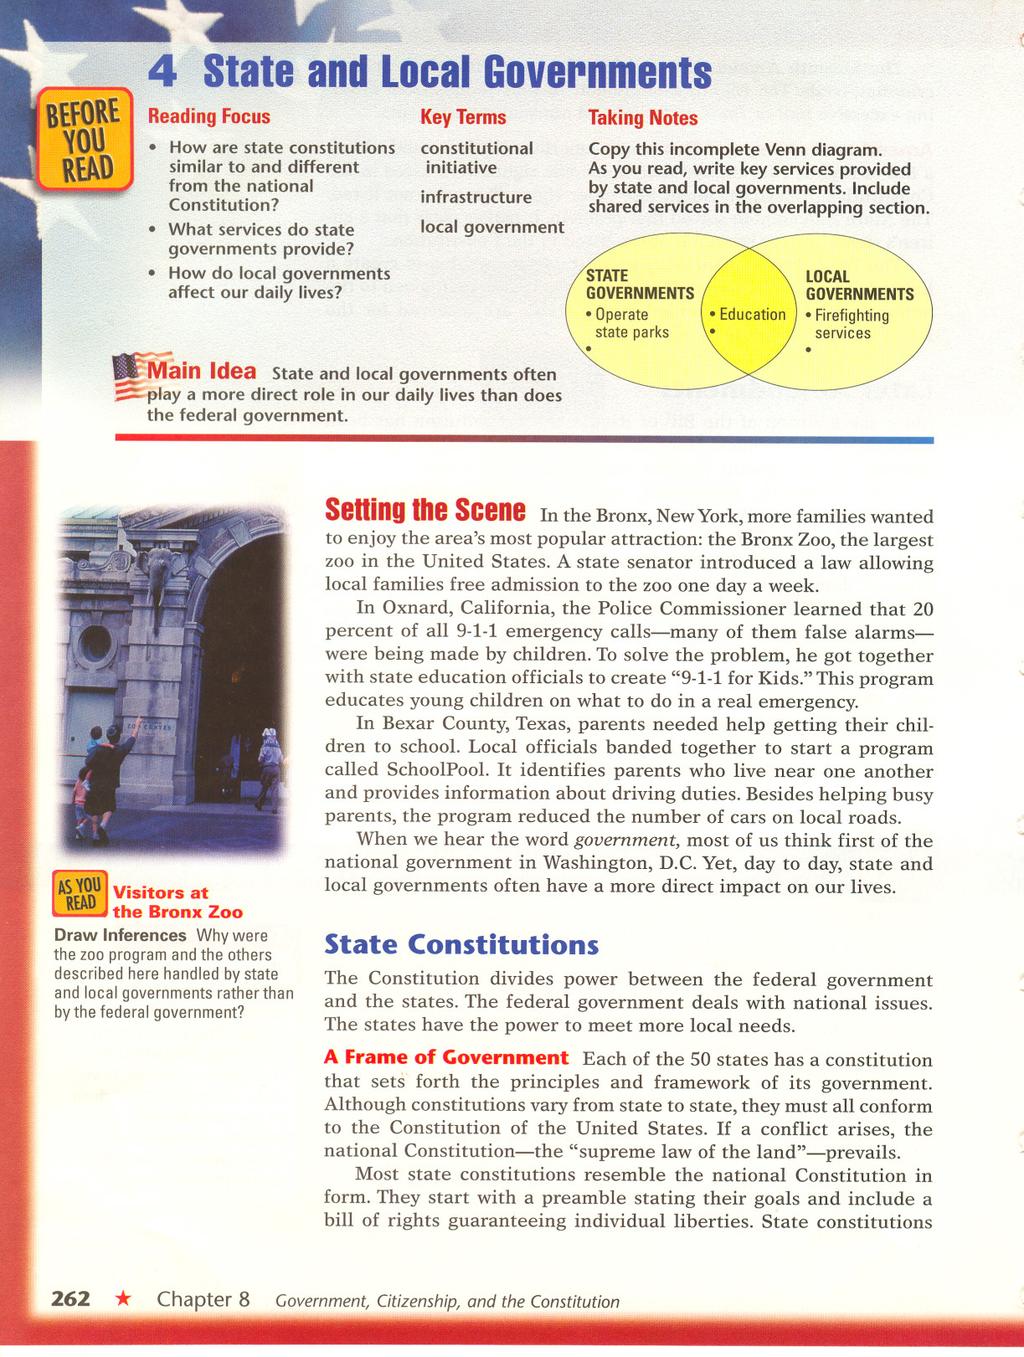 4 State and Local Governments Reading Focus How are state constitutions similar to and different from the national Constitution? What services do state governments provide?